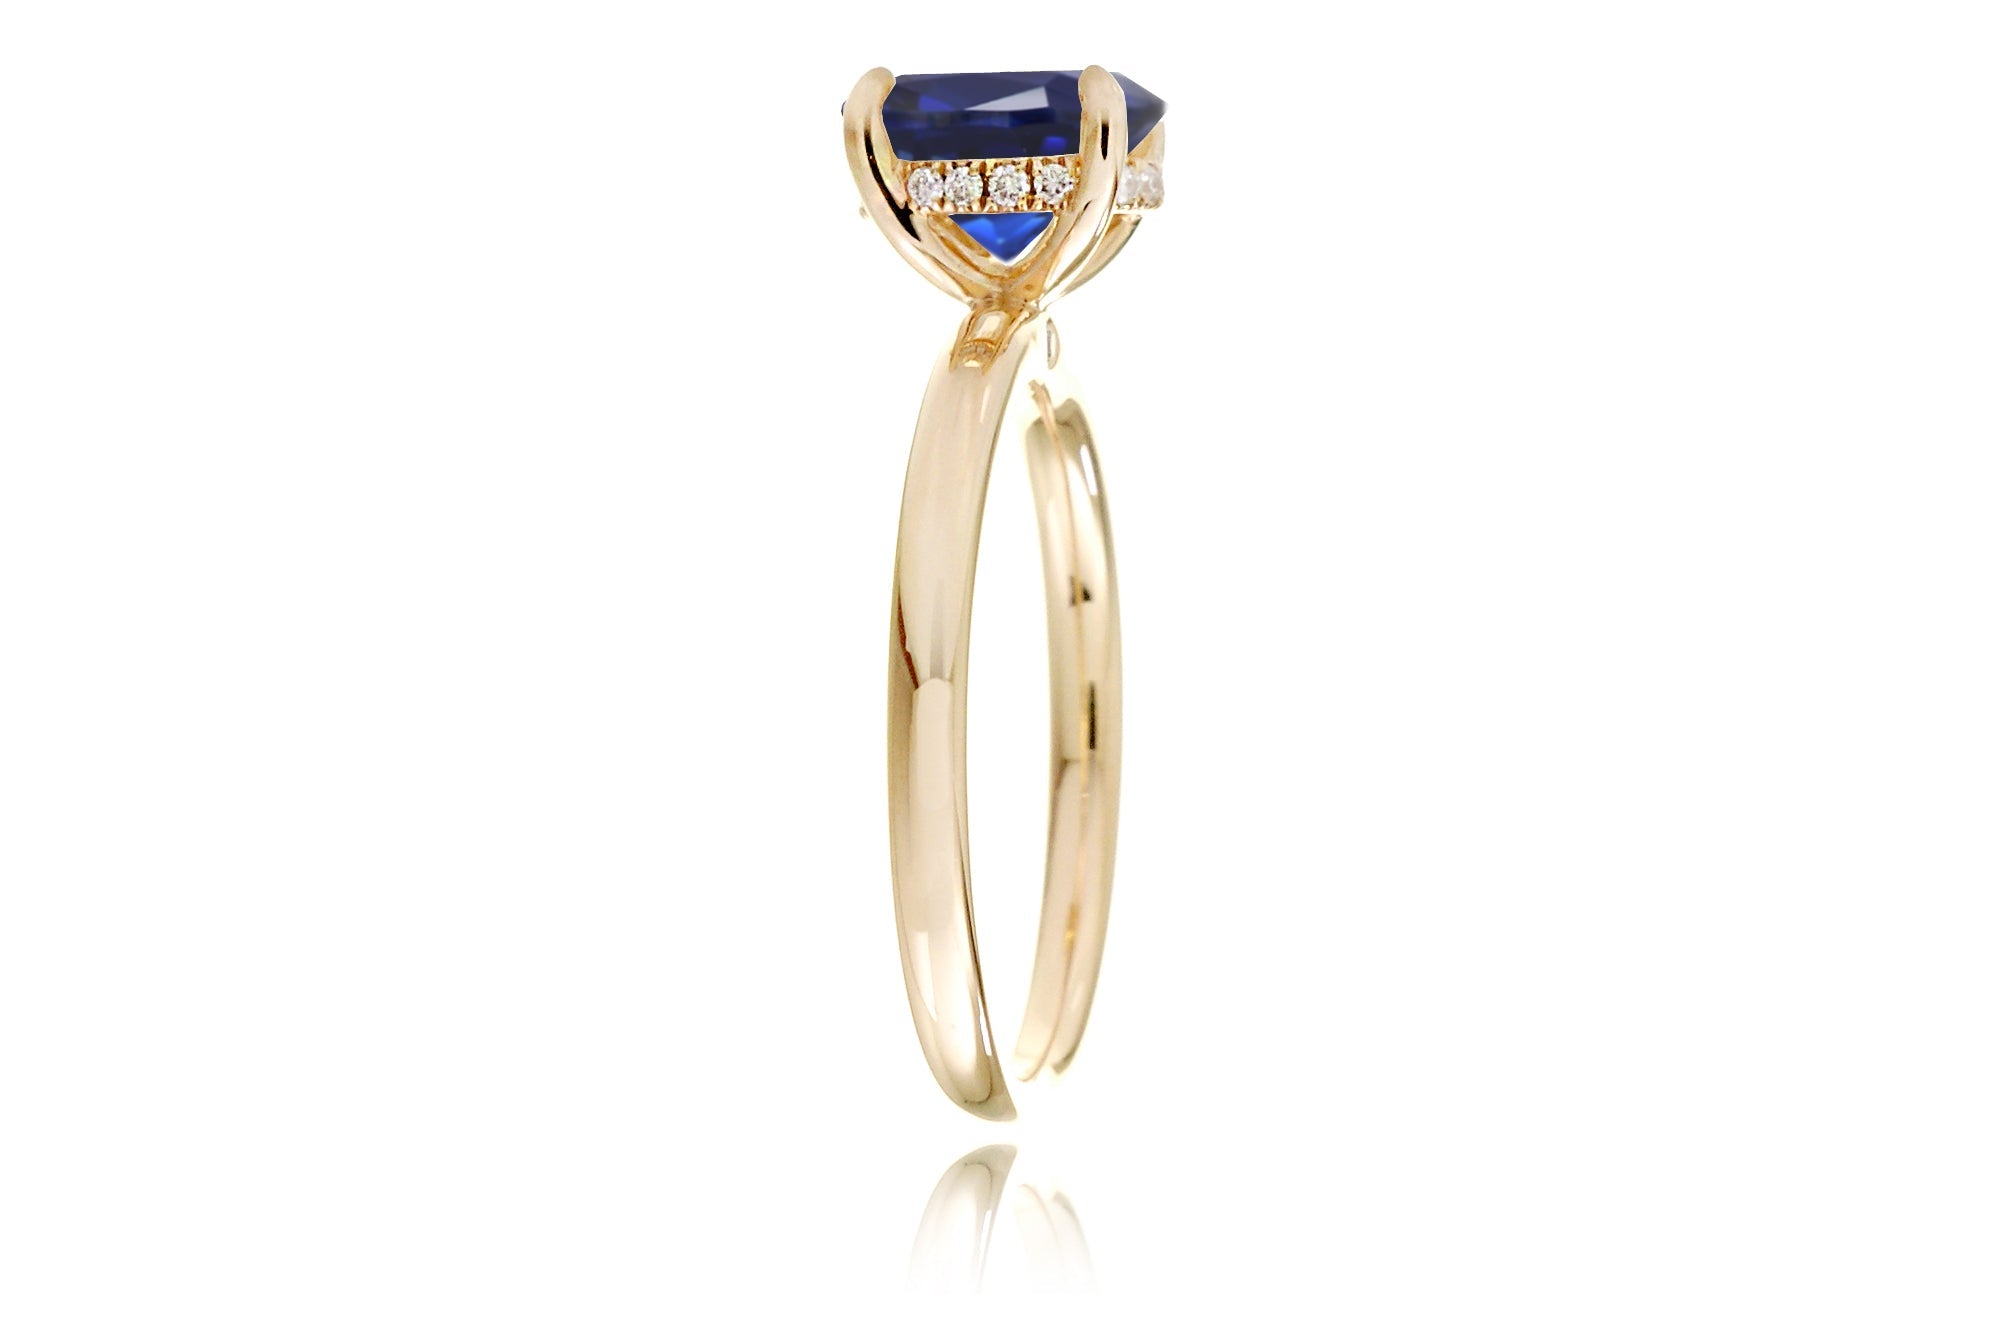 The Lucy Pear Cut Blue Sapphire Ring (Lab-Grown)